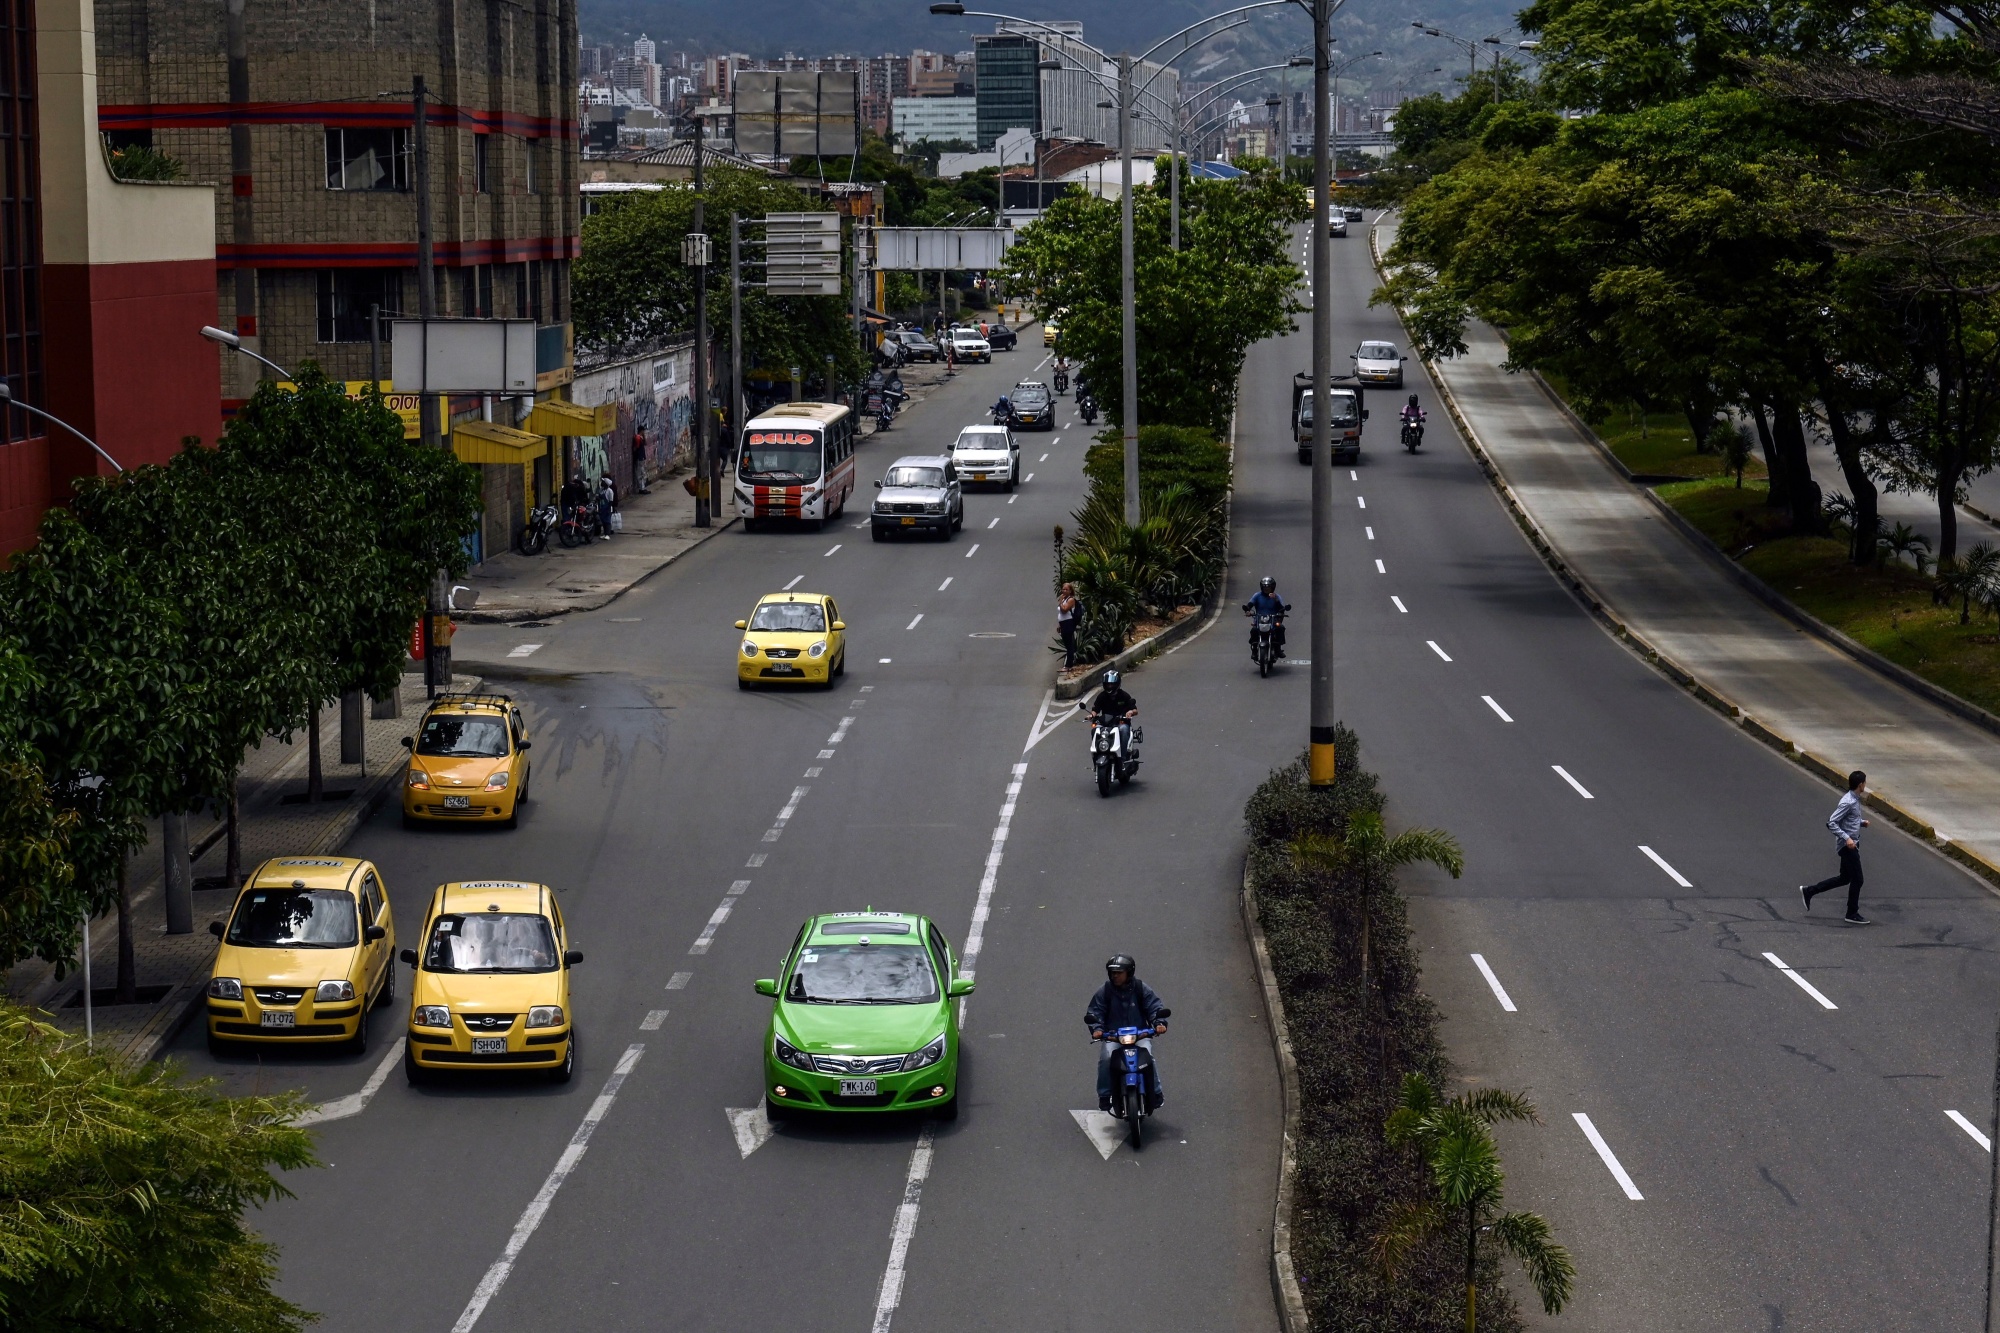 An electric taxi (C, green) drives along a street in Medellin, Colombia, on September 19, 2019.&nbsp;